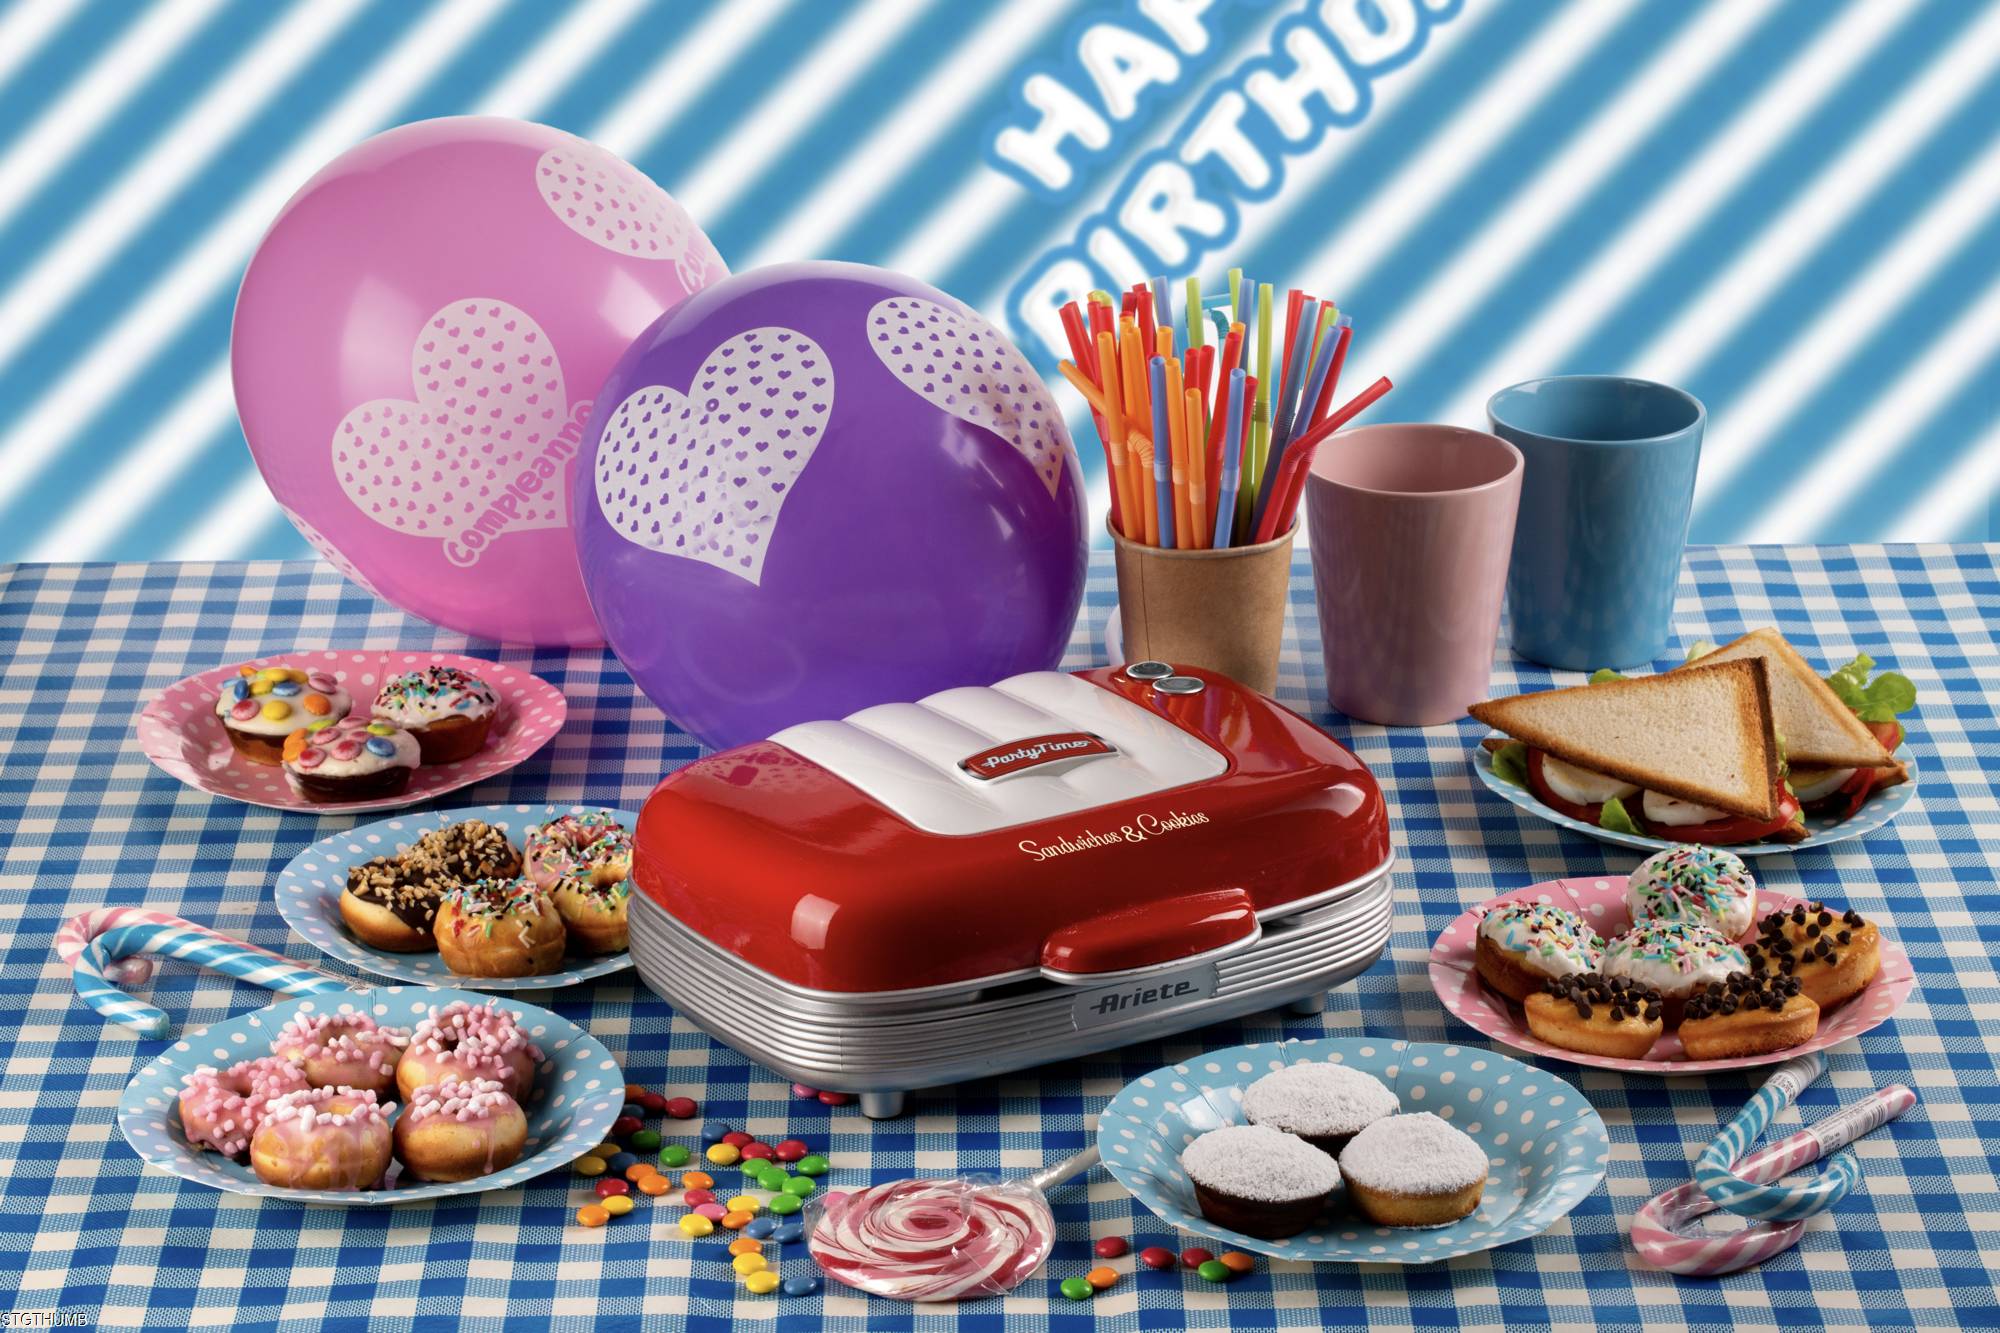 party-time-ariete-sanwiches&cookies-maker